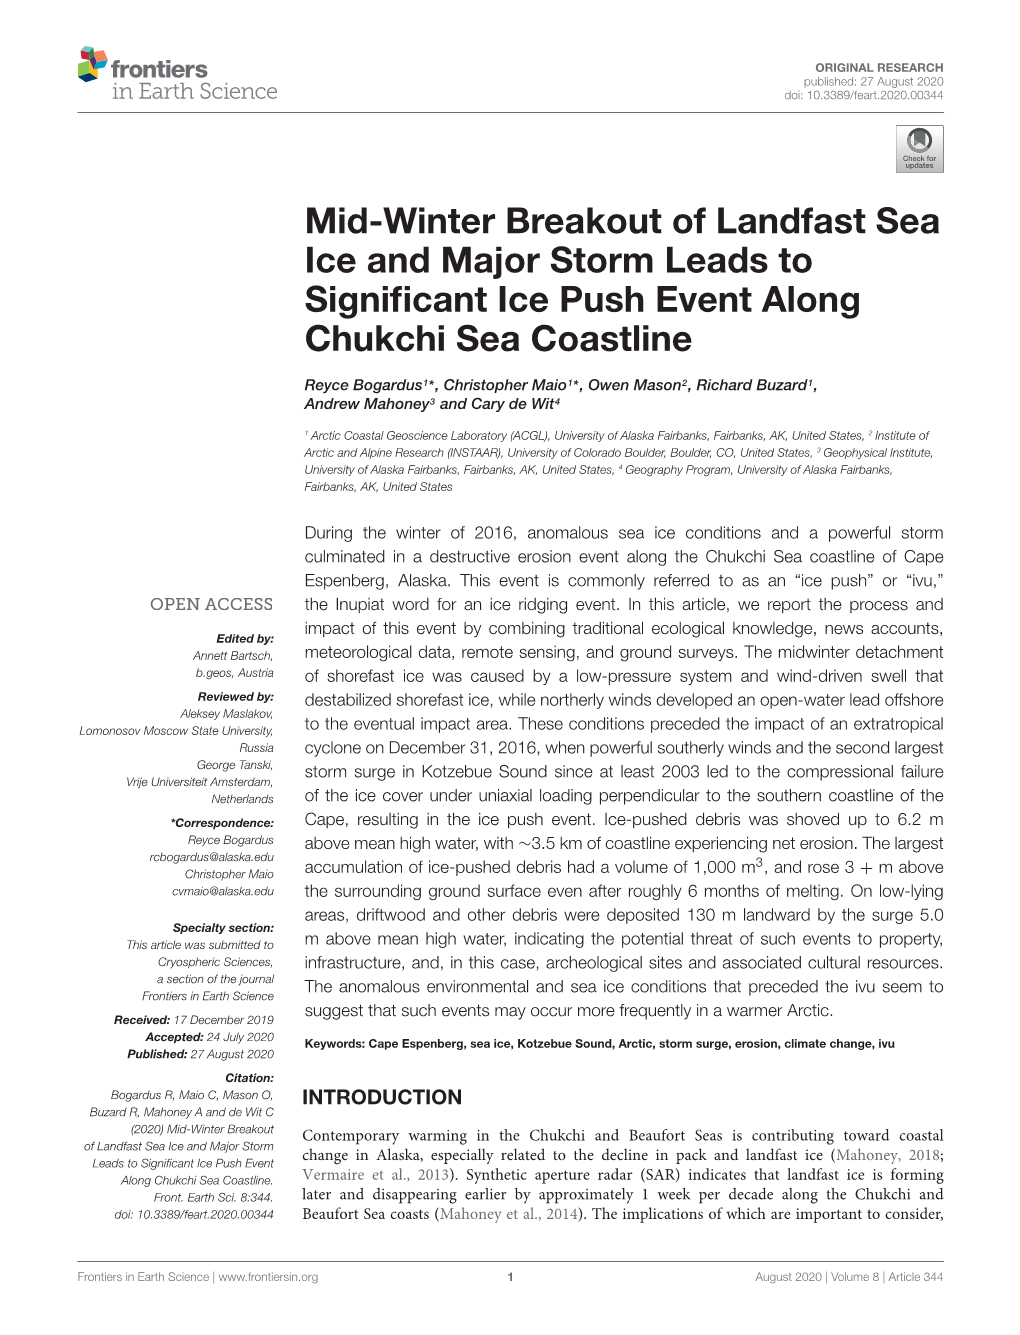 Mid-Winter Breakout of Landfast Sea Ice and Major Storm Leads to Significant Ice Push Event Along Chukchi Sea Coastline